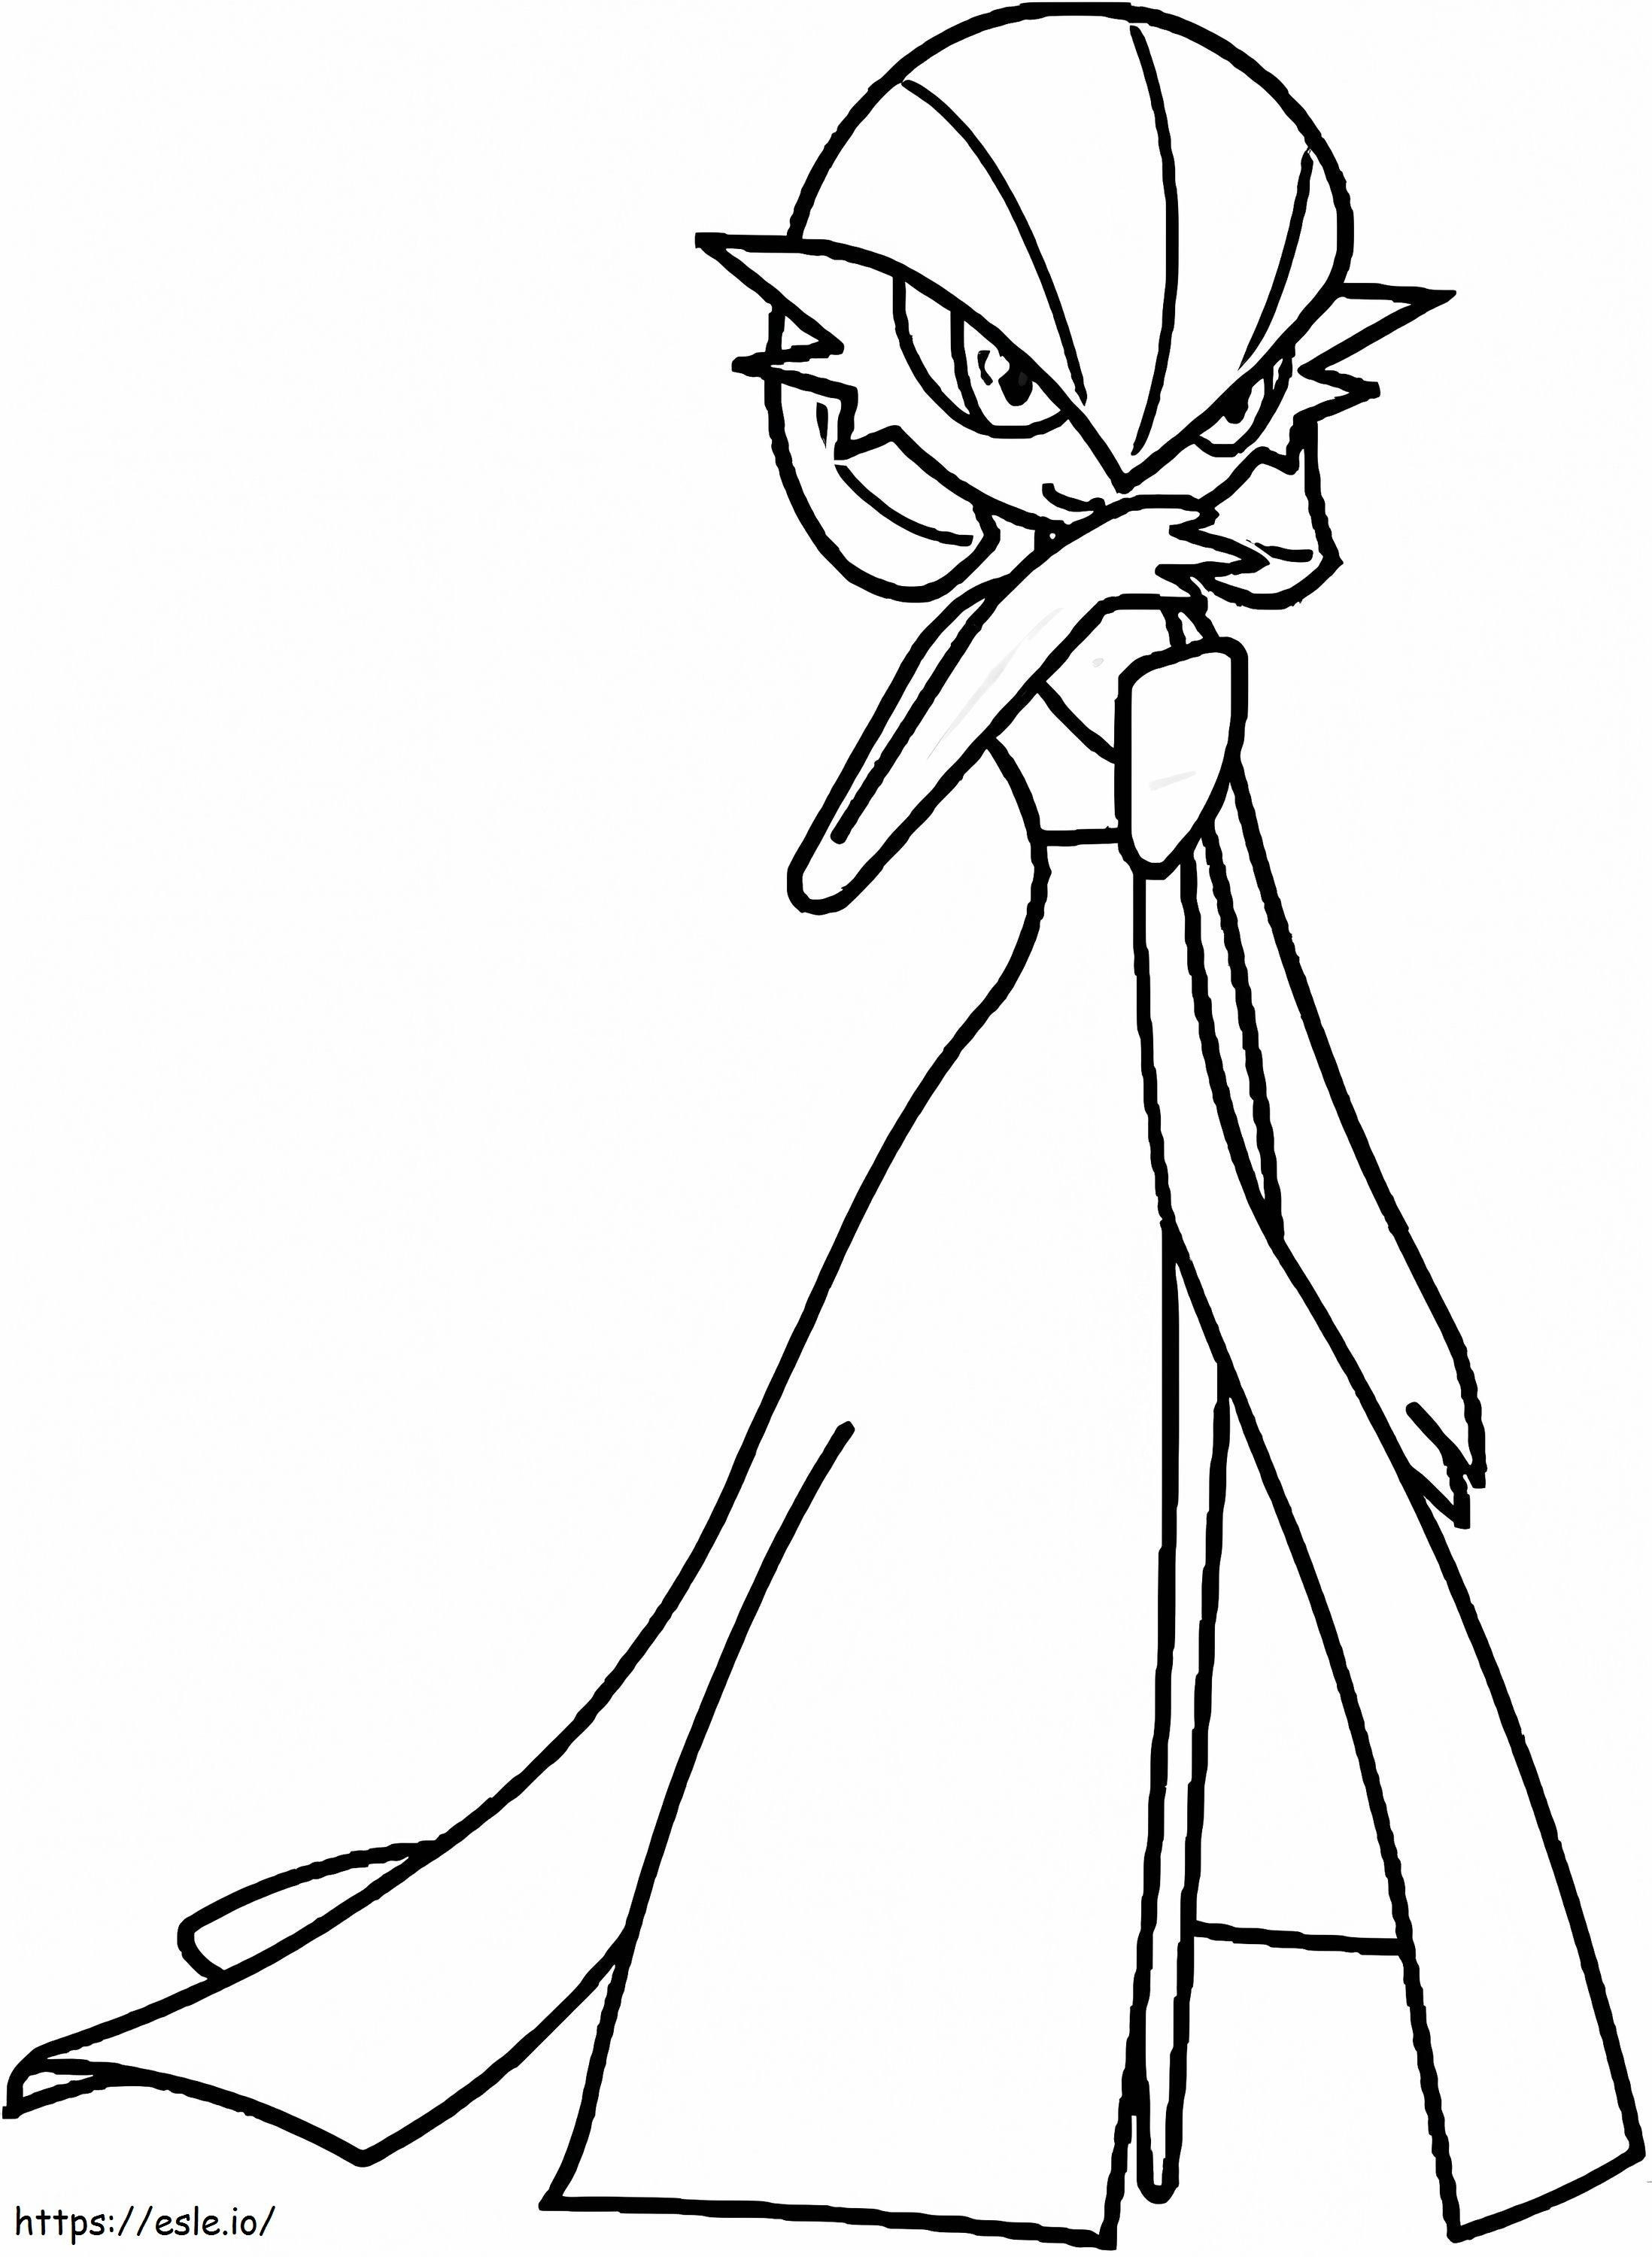 Gardevoir 2 coloring page